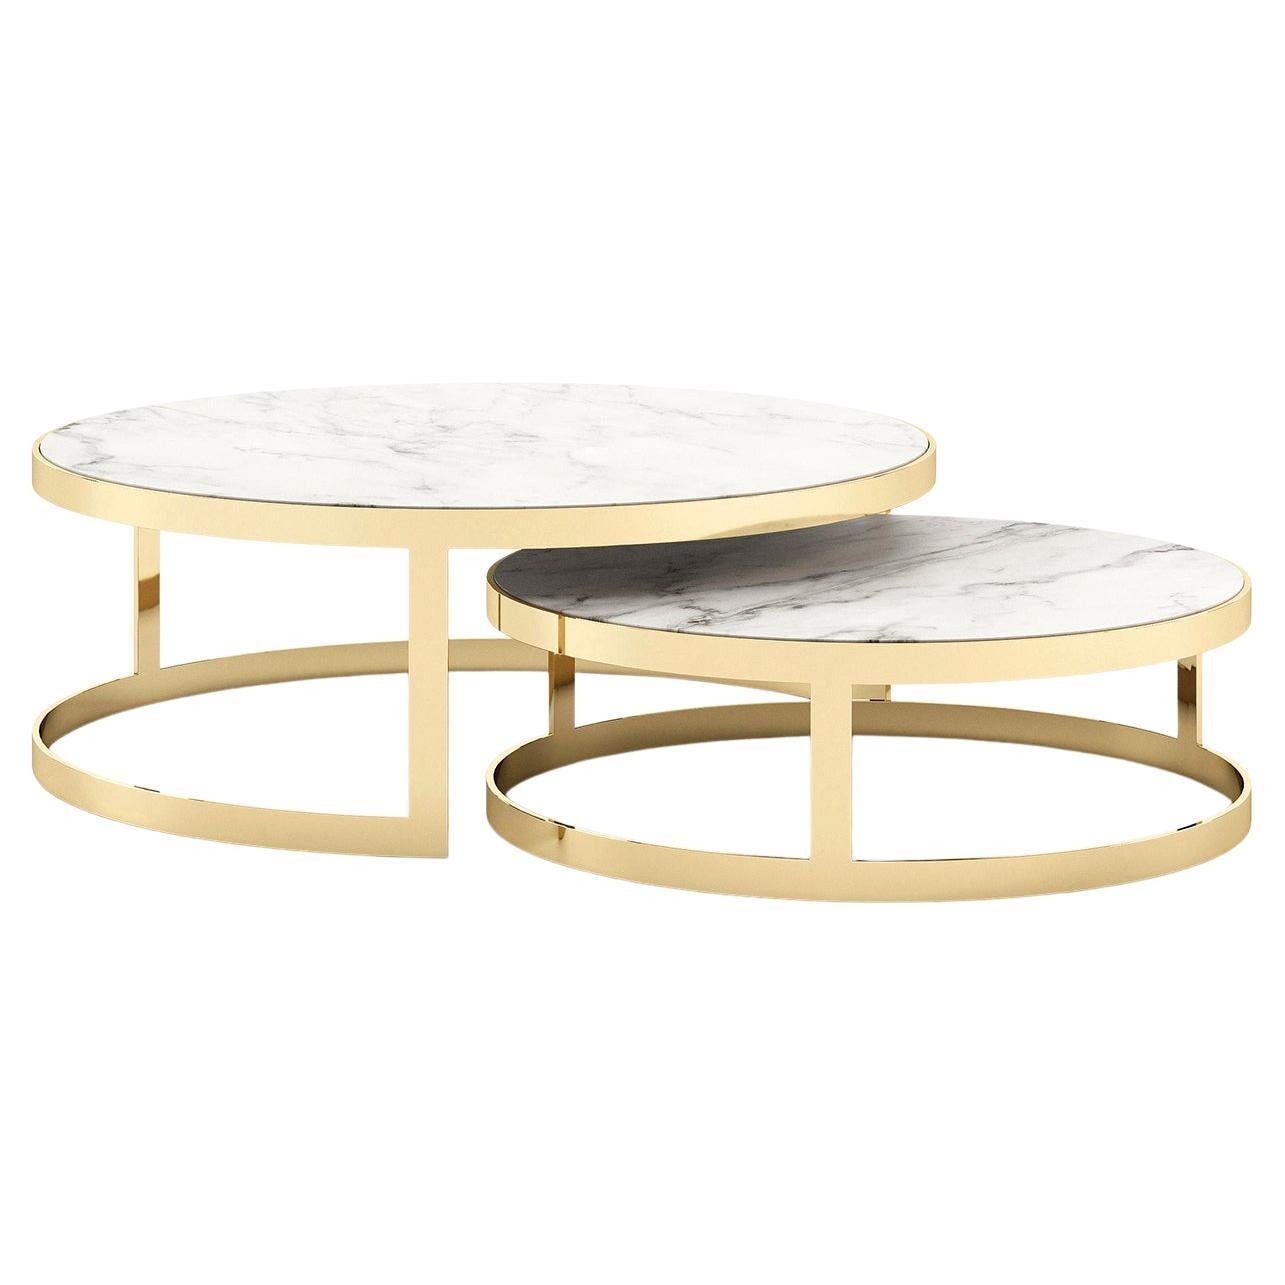 Torent Set of 2 Coffee Table